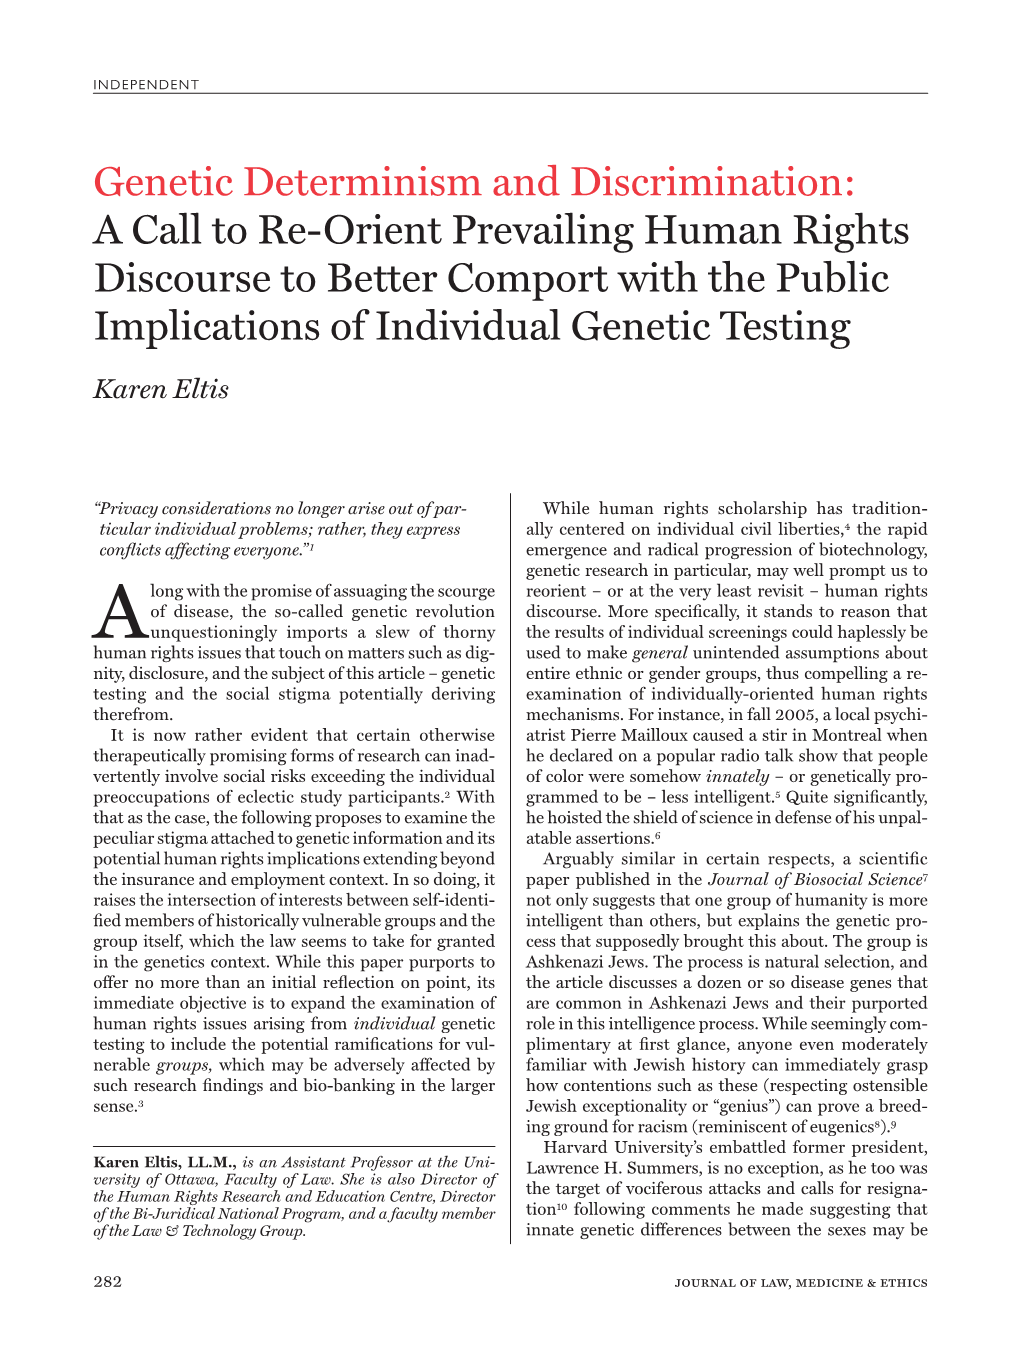 Genetic Determinism and Discrimination: a Call to Re-Orient